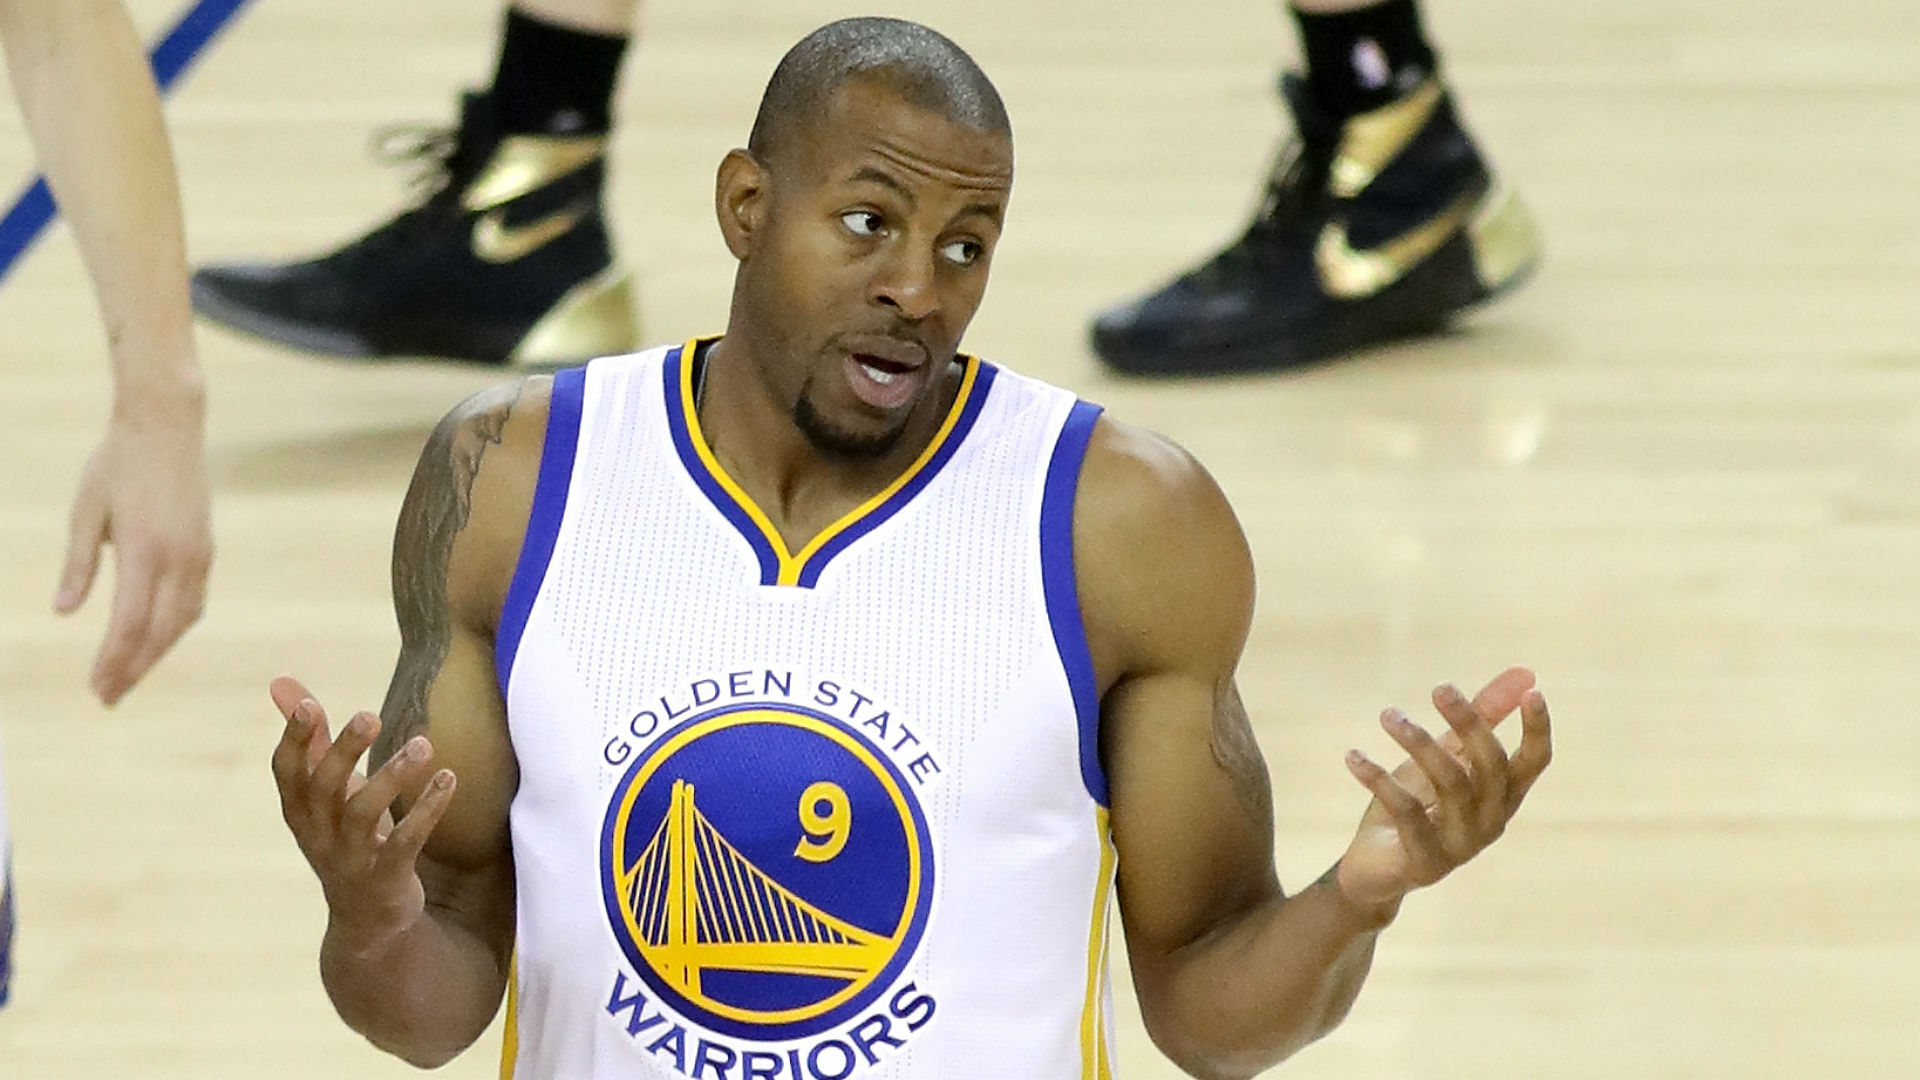 Andre Iguodala's race-related comments cause stir in locker room | NBA | Sporting News1920 x 1080